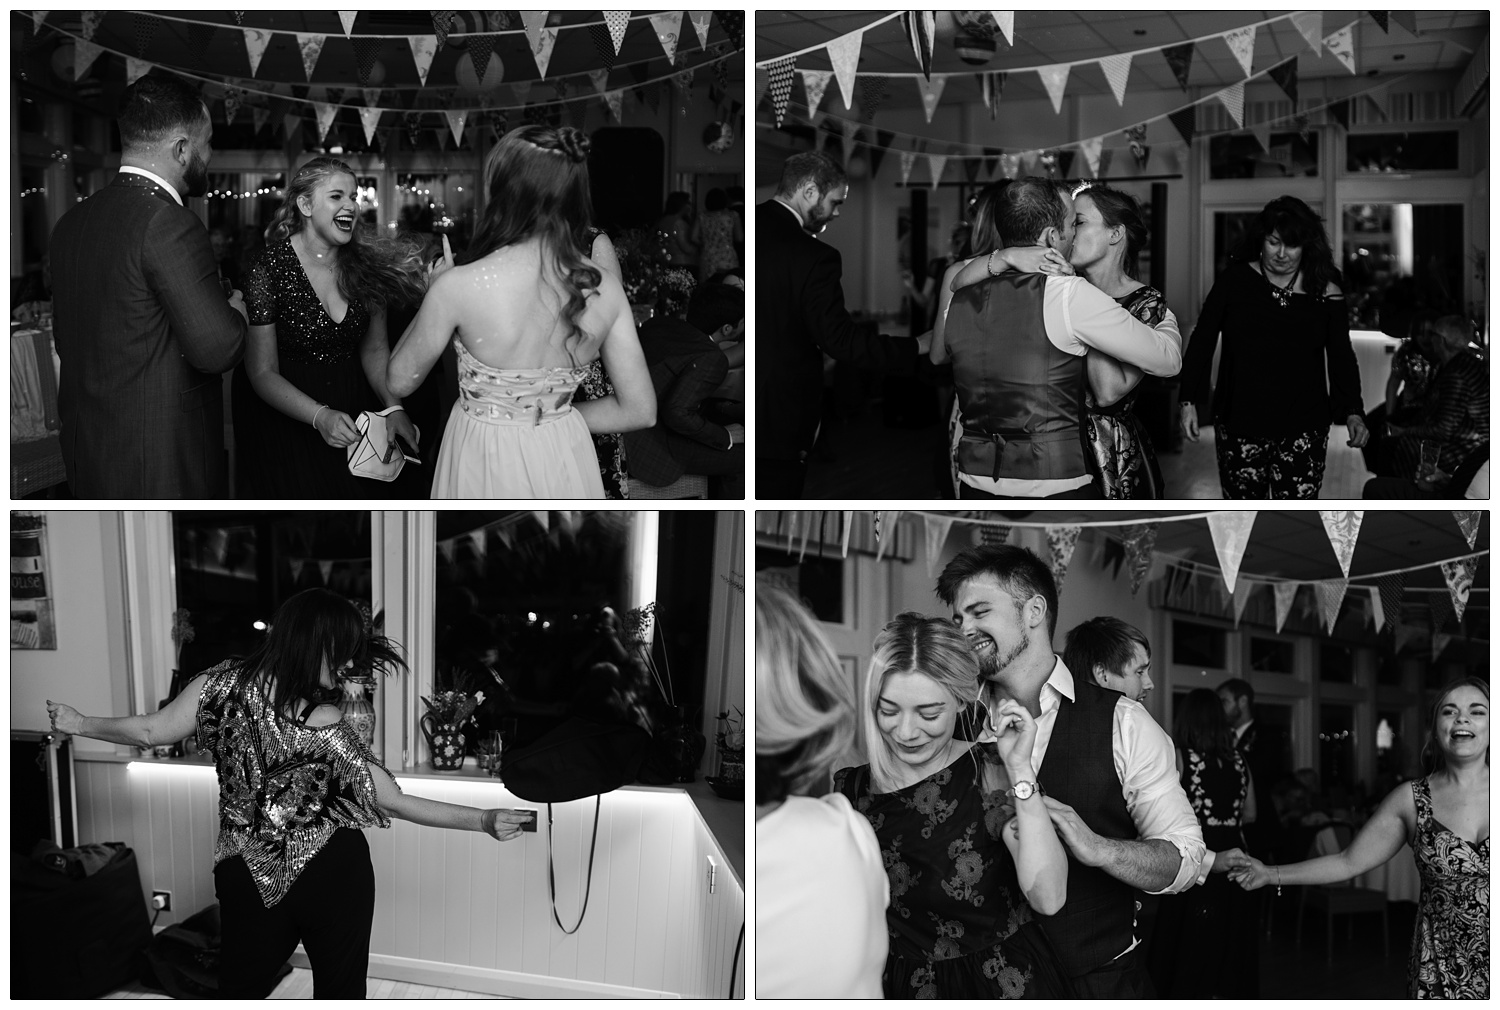 Reportage style wedding photography at a wedding reception by the River Crouch in Essex. They are black and white photographs of dancing and kissing.